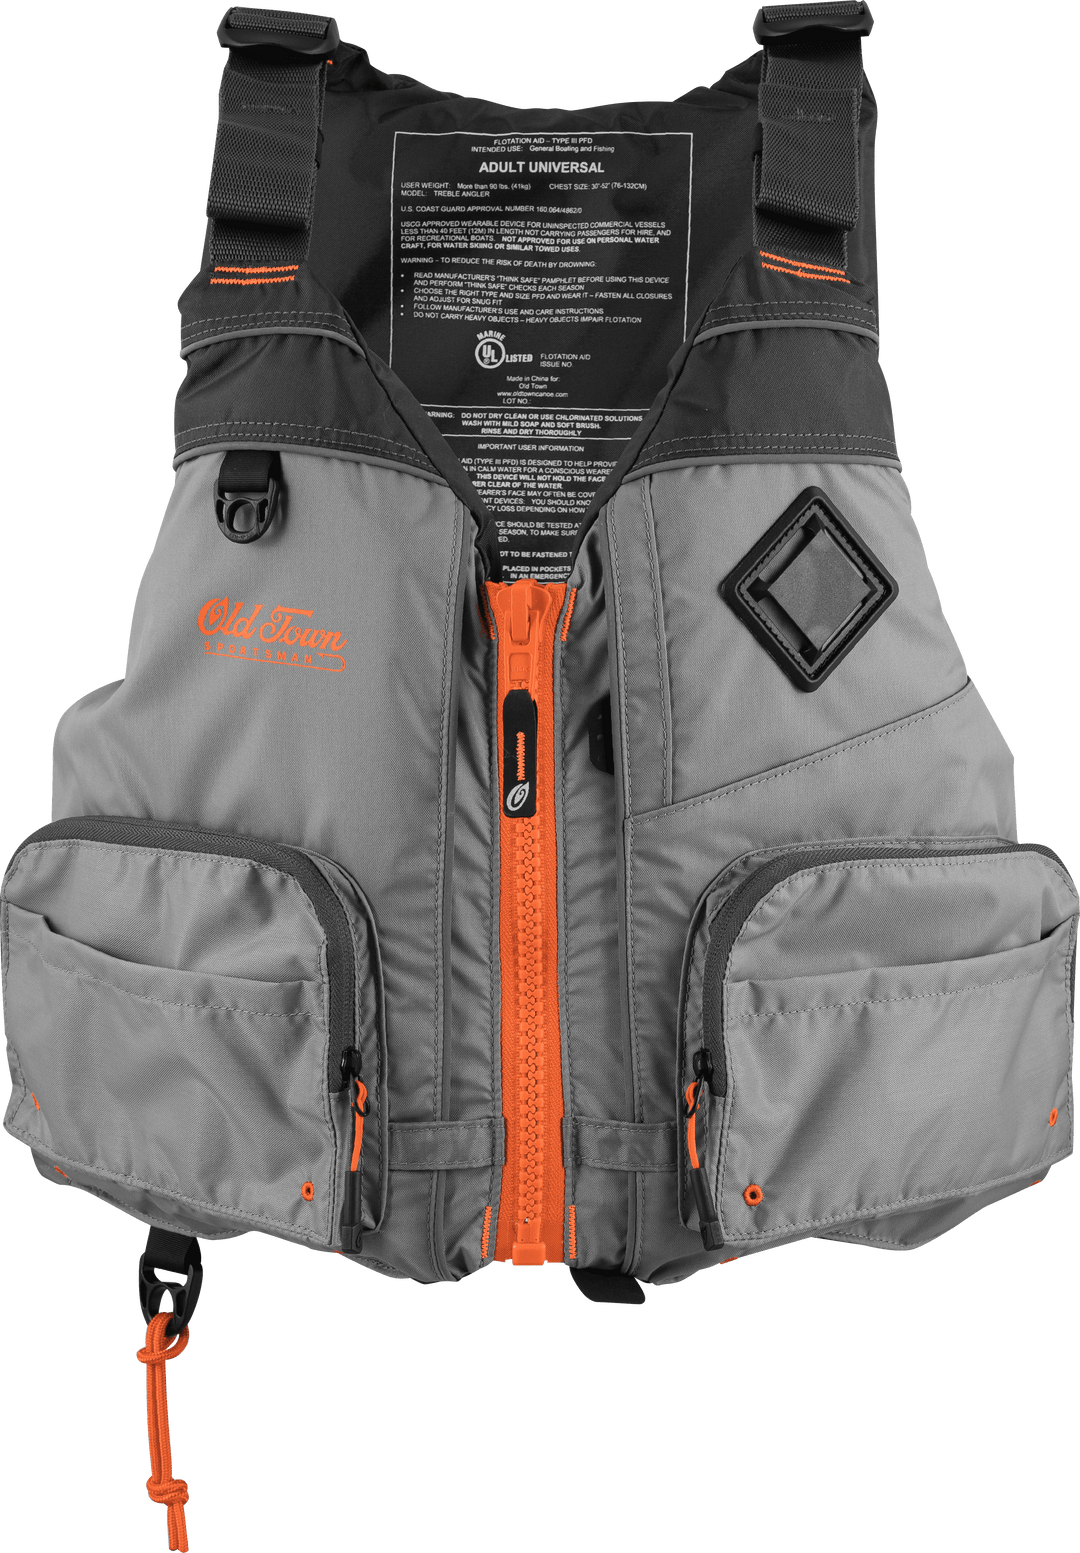 Old Town - Treble Angler Sportsman PFD Life Jacket - Silver w/ Orange Accents Accessories Old Town Canoe 